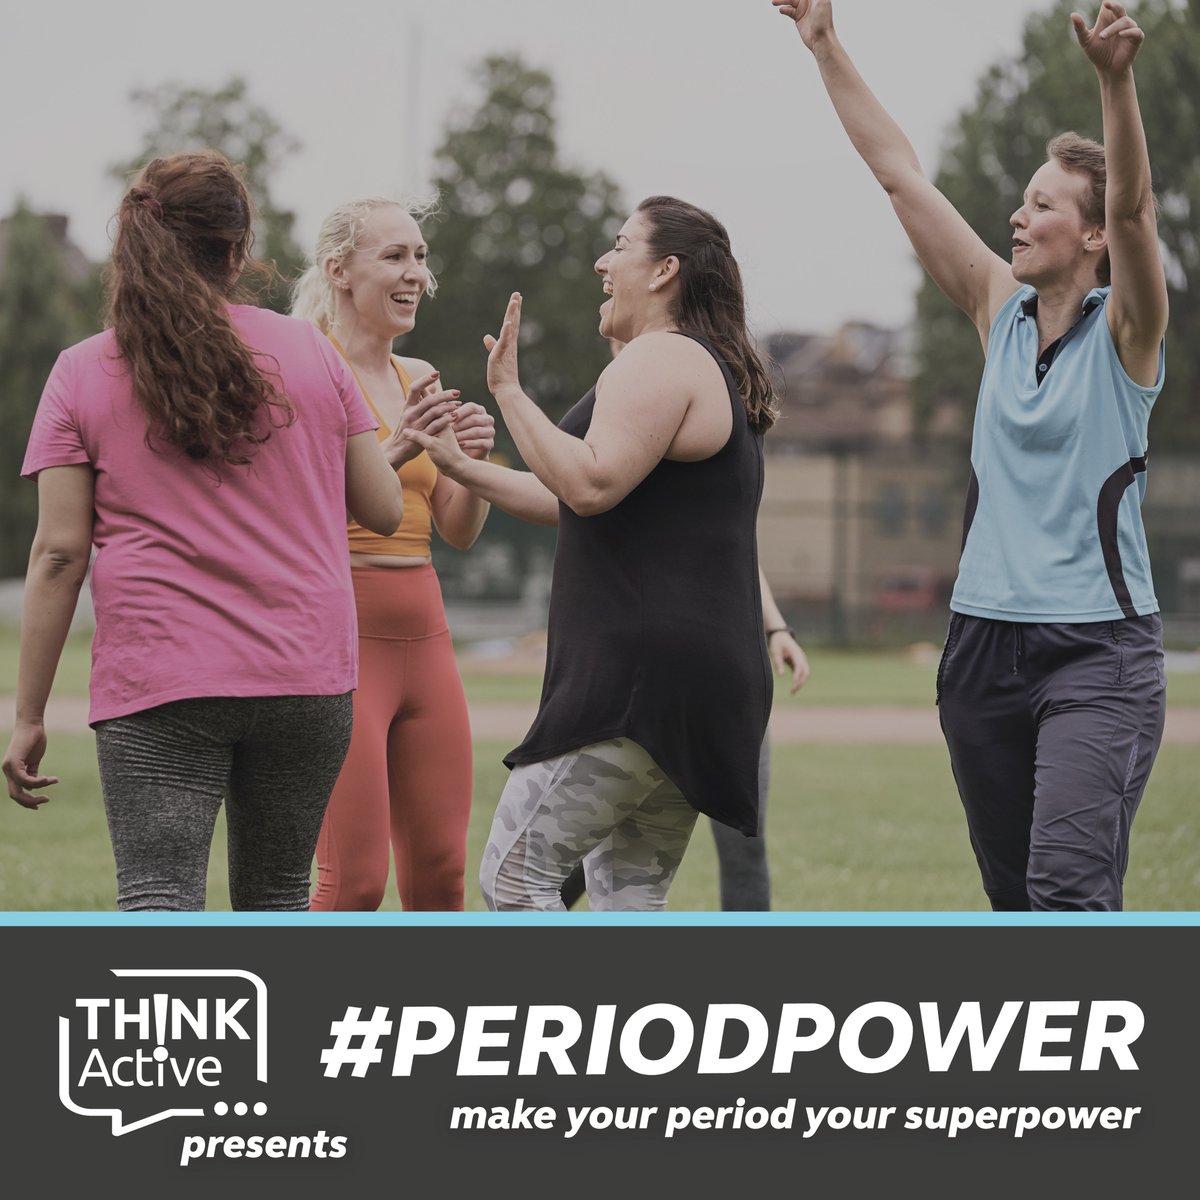 Want to learn about #periodpower ? Put 6th March in your diaries & book onto our insightful event at @1millstreet with @SLTaylor73 & @zubaidihussain using this link bit.ly/periodpowercsw 👊 Please share this far and wide, so we can learn how to better support women and girls.🙏